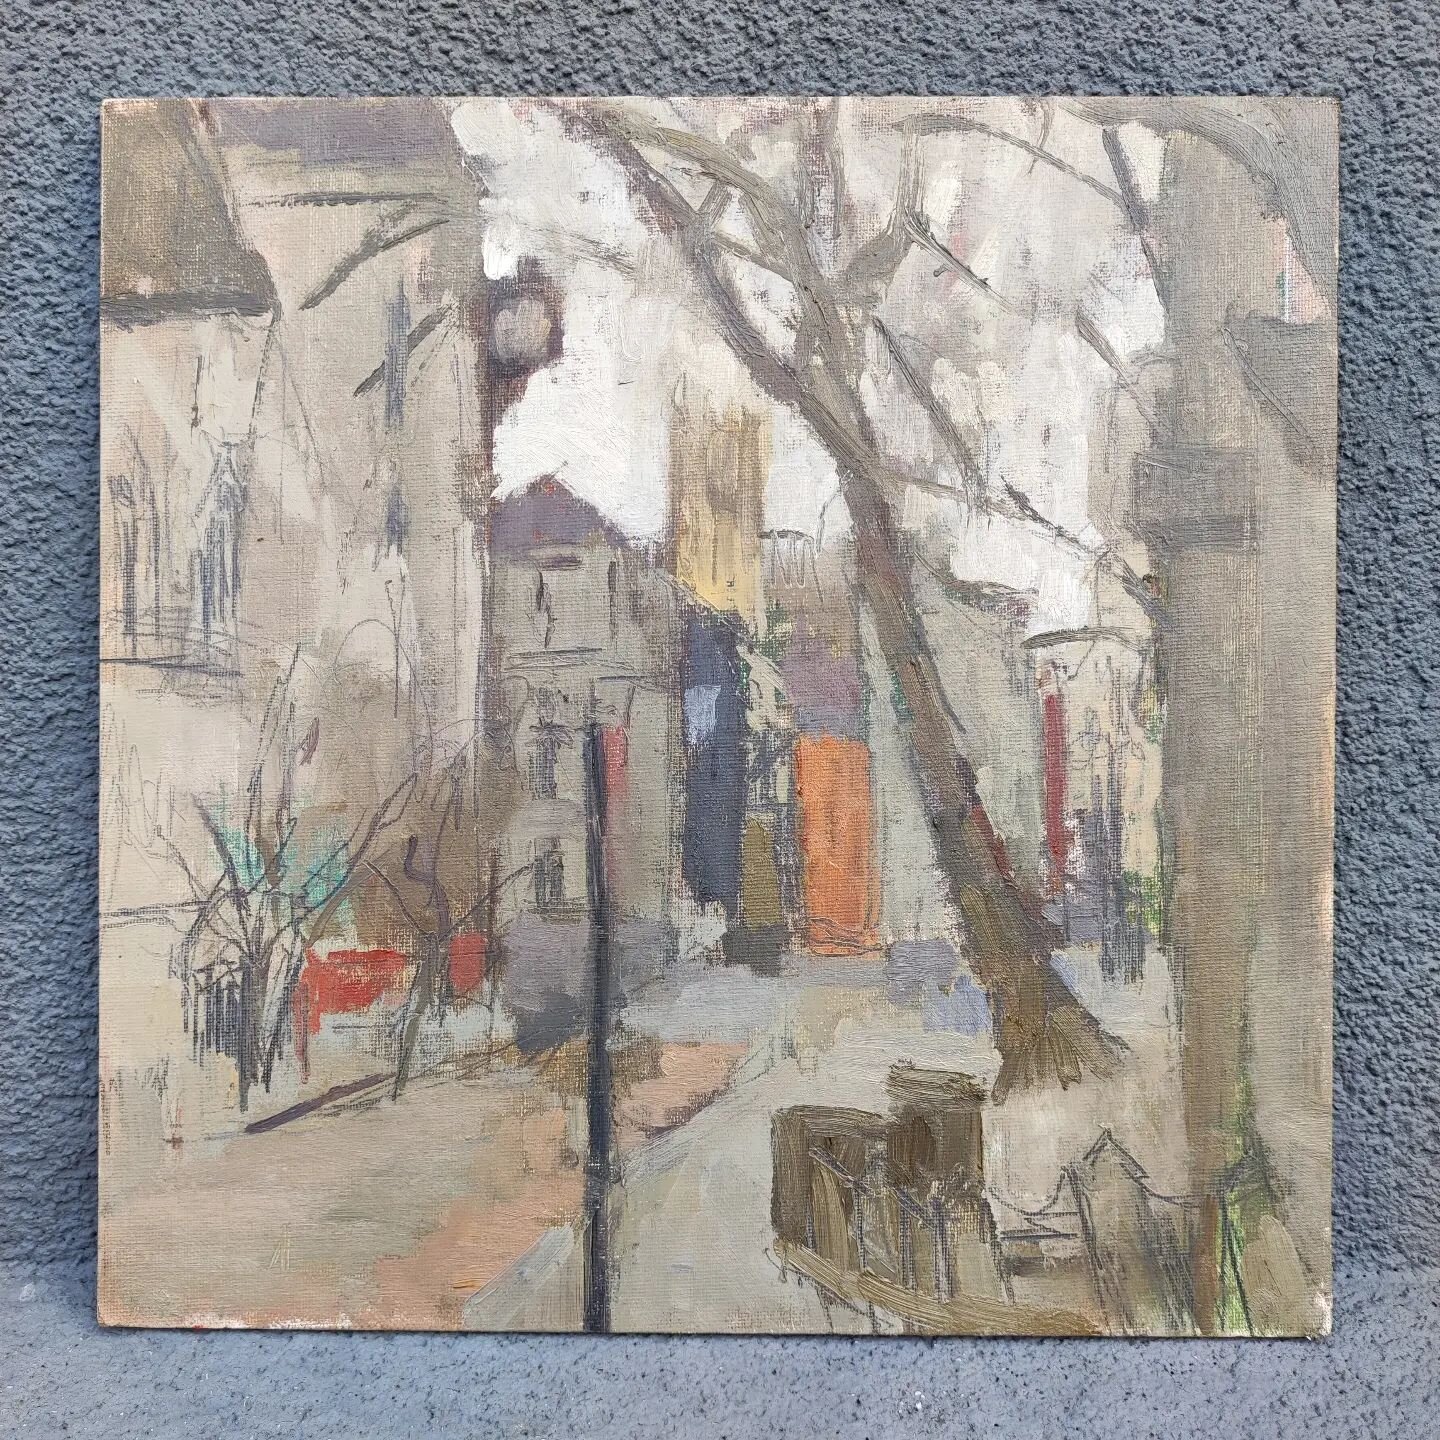 Fleet Street - trickiest painting I have attempted for ages. I want to do more like this.
Oil on panel 12 x 12&quot;
.
@londonpleinairgroup #londonlandscape #oilpainting #fleetstreet #zornpalette #transparentoxideyellow